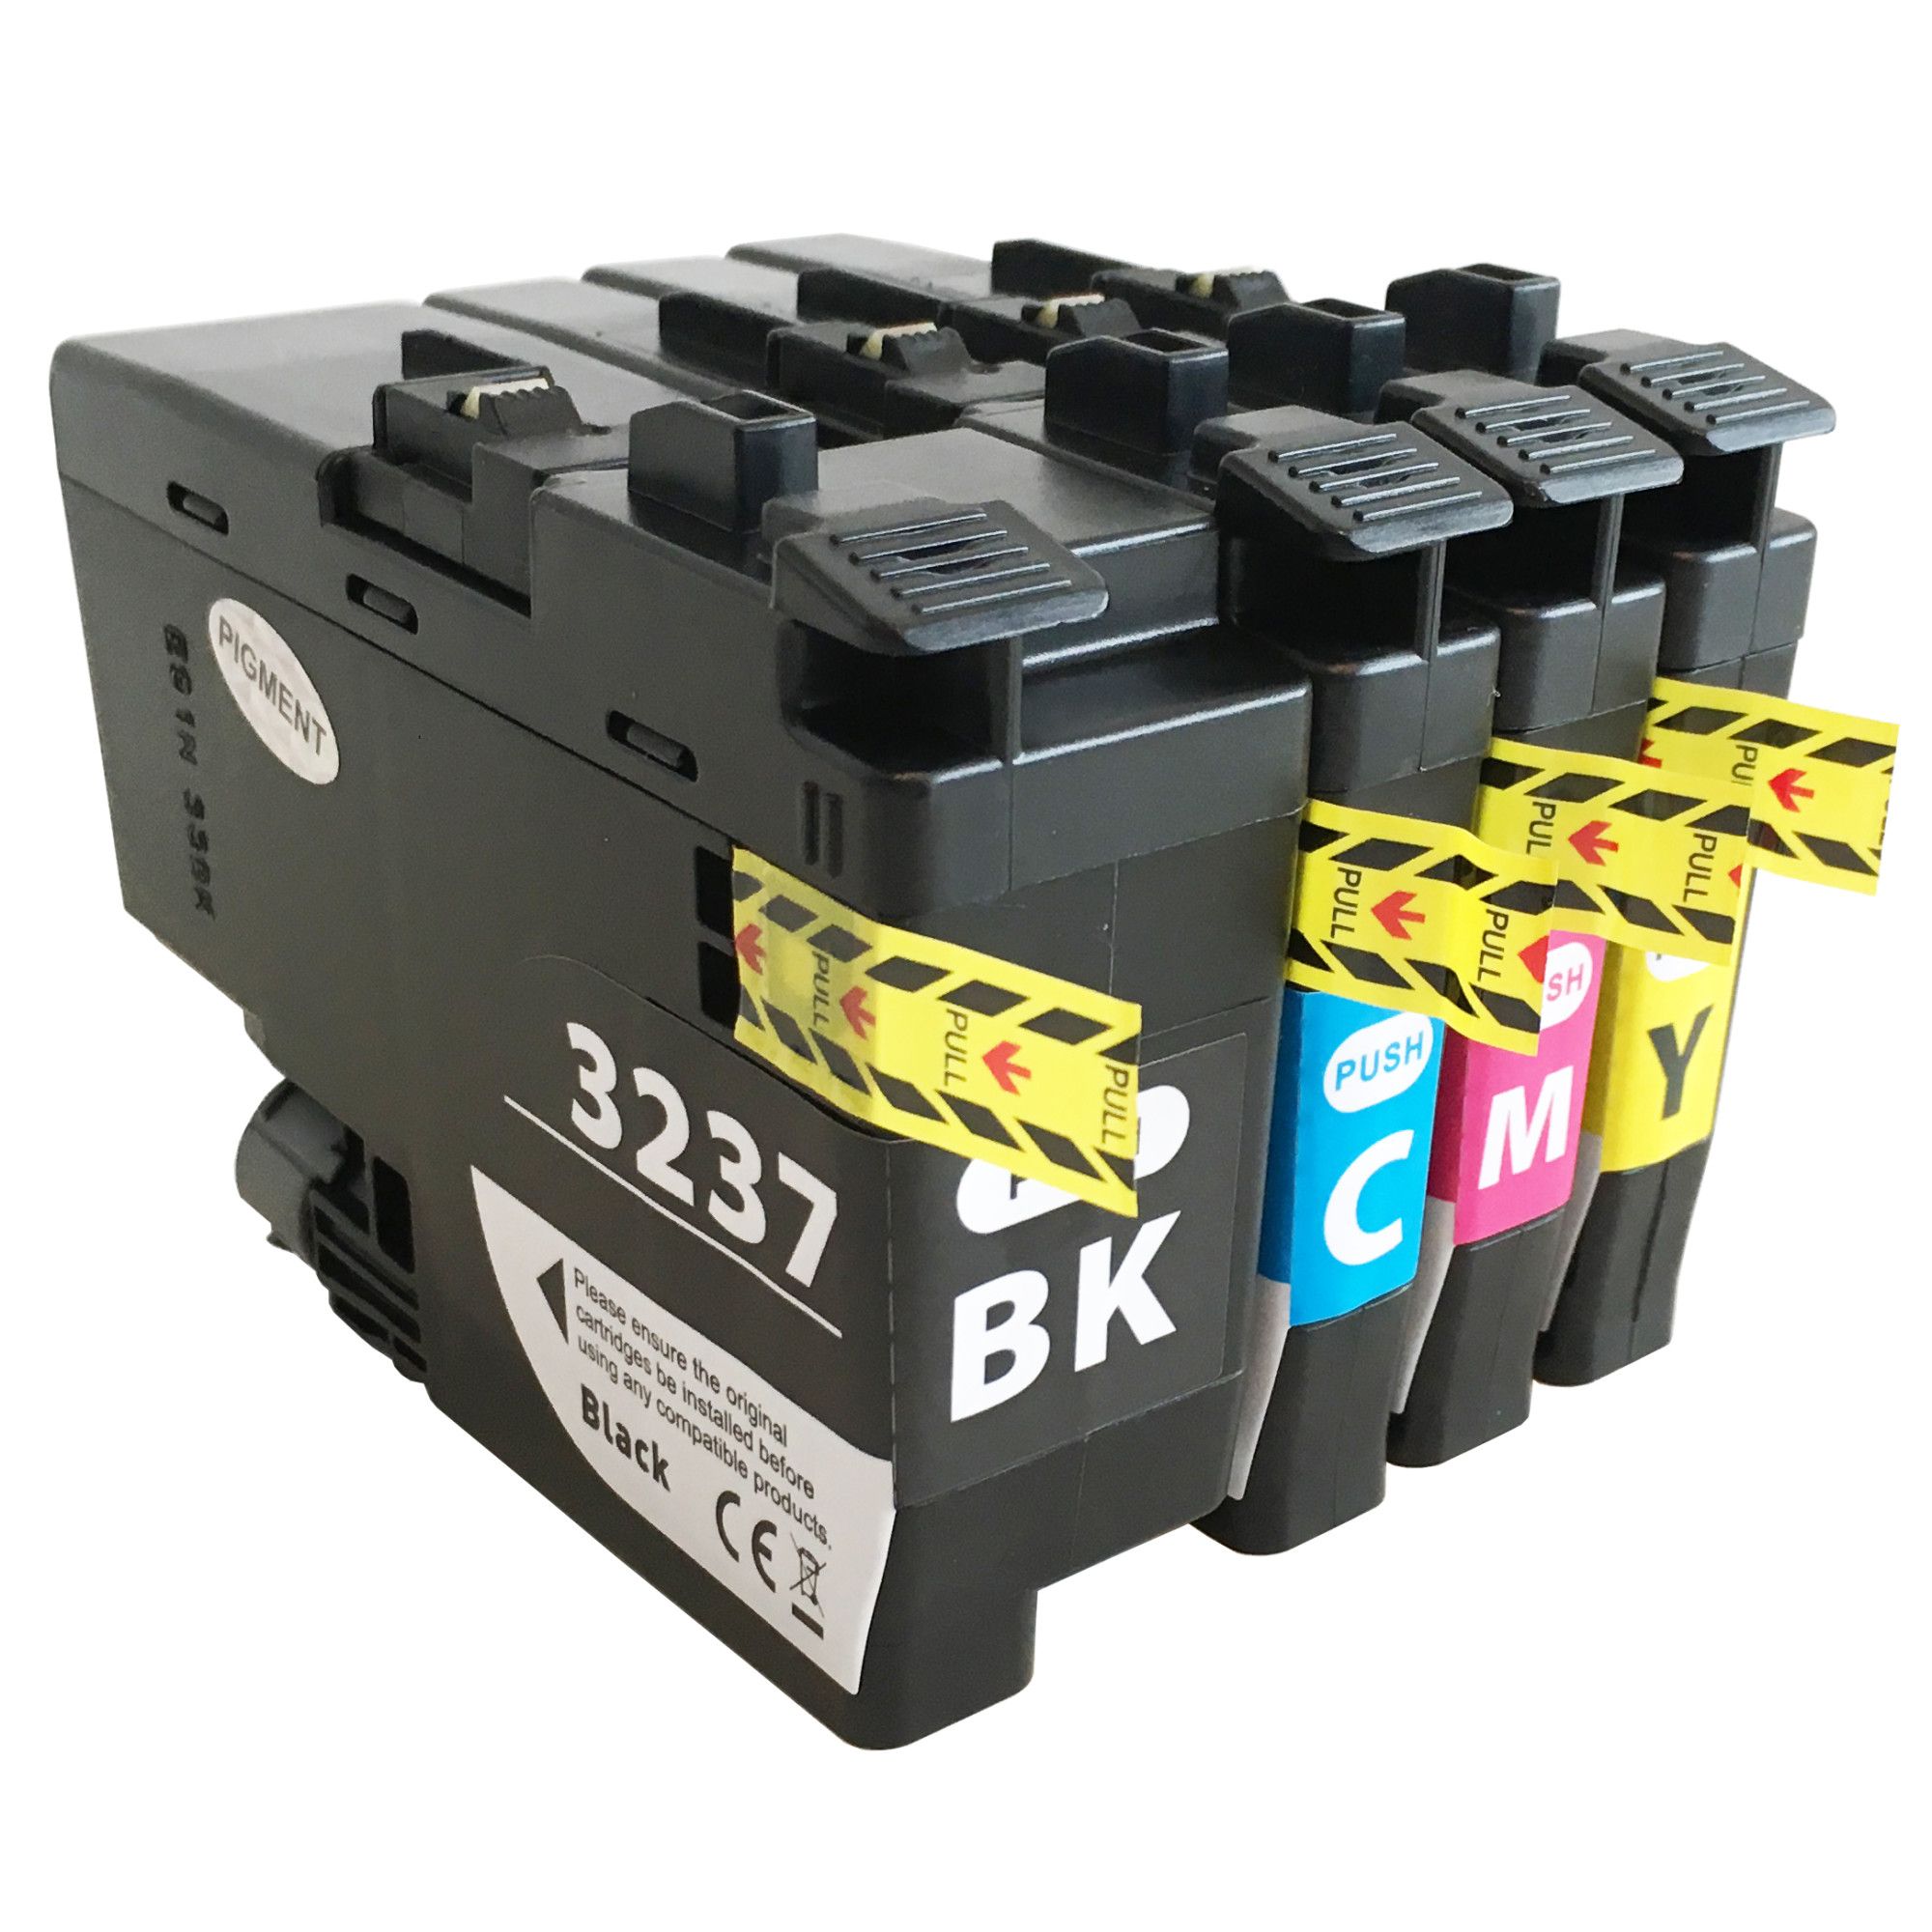 Tru Image Brother LC3237 Multi Pack Ink Cartridge Compatible LC3237BK/LC3237C/LC3237M/LC3237Y) (LC3237VALBP-CPT)